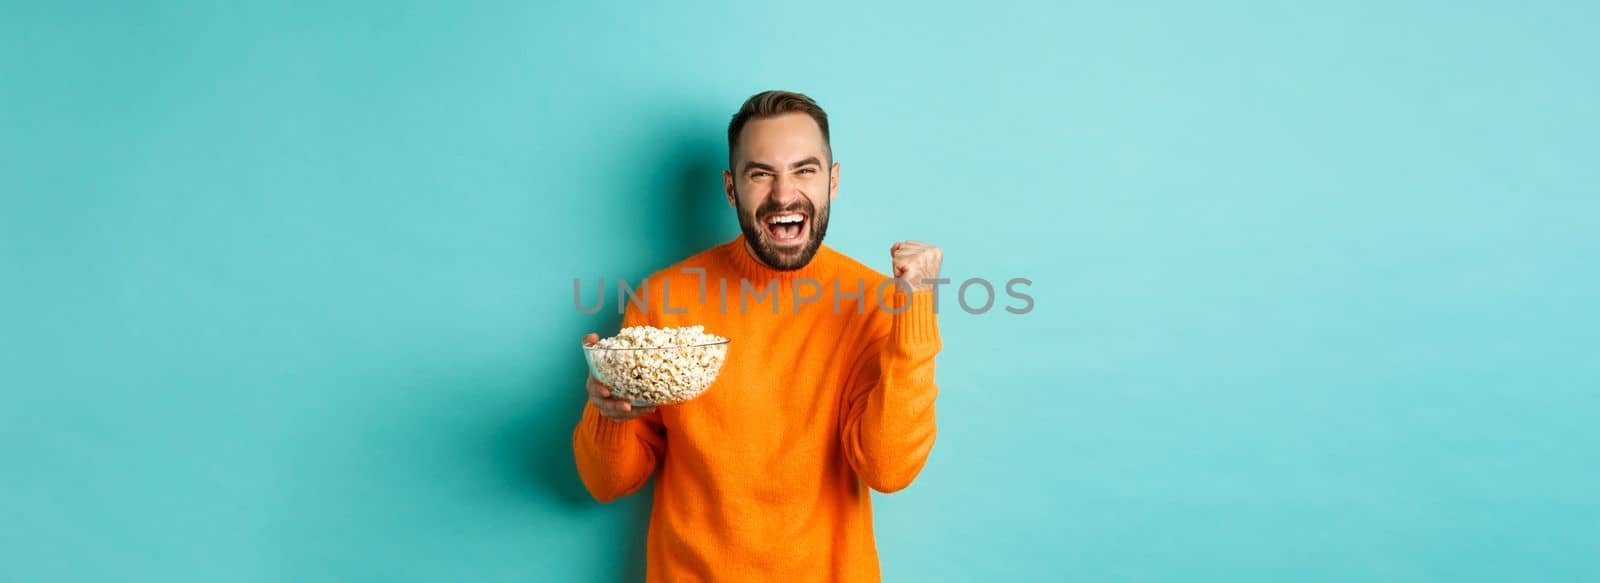 Cheerful handsome man in orange sweater, saying yes, cheering and rejoicing, eating popcorn and watching sports, making fist pump satisfied, standing over blue background.